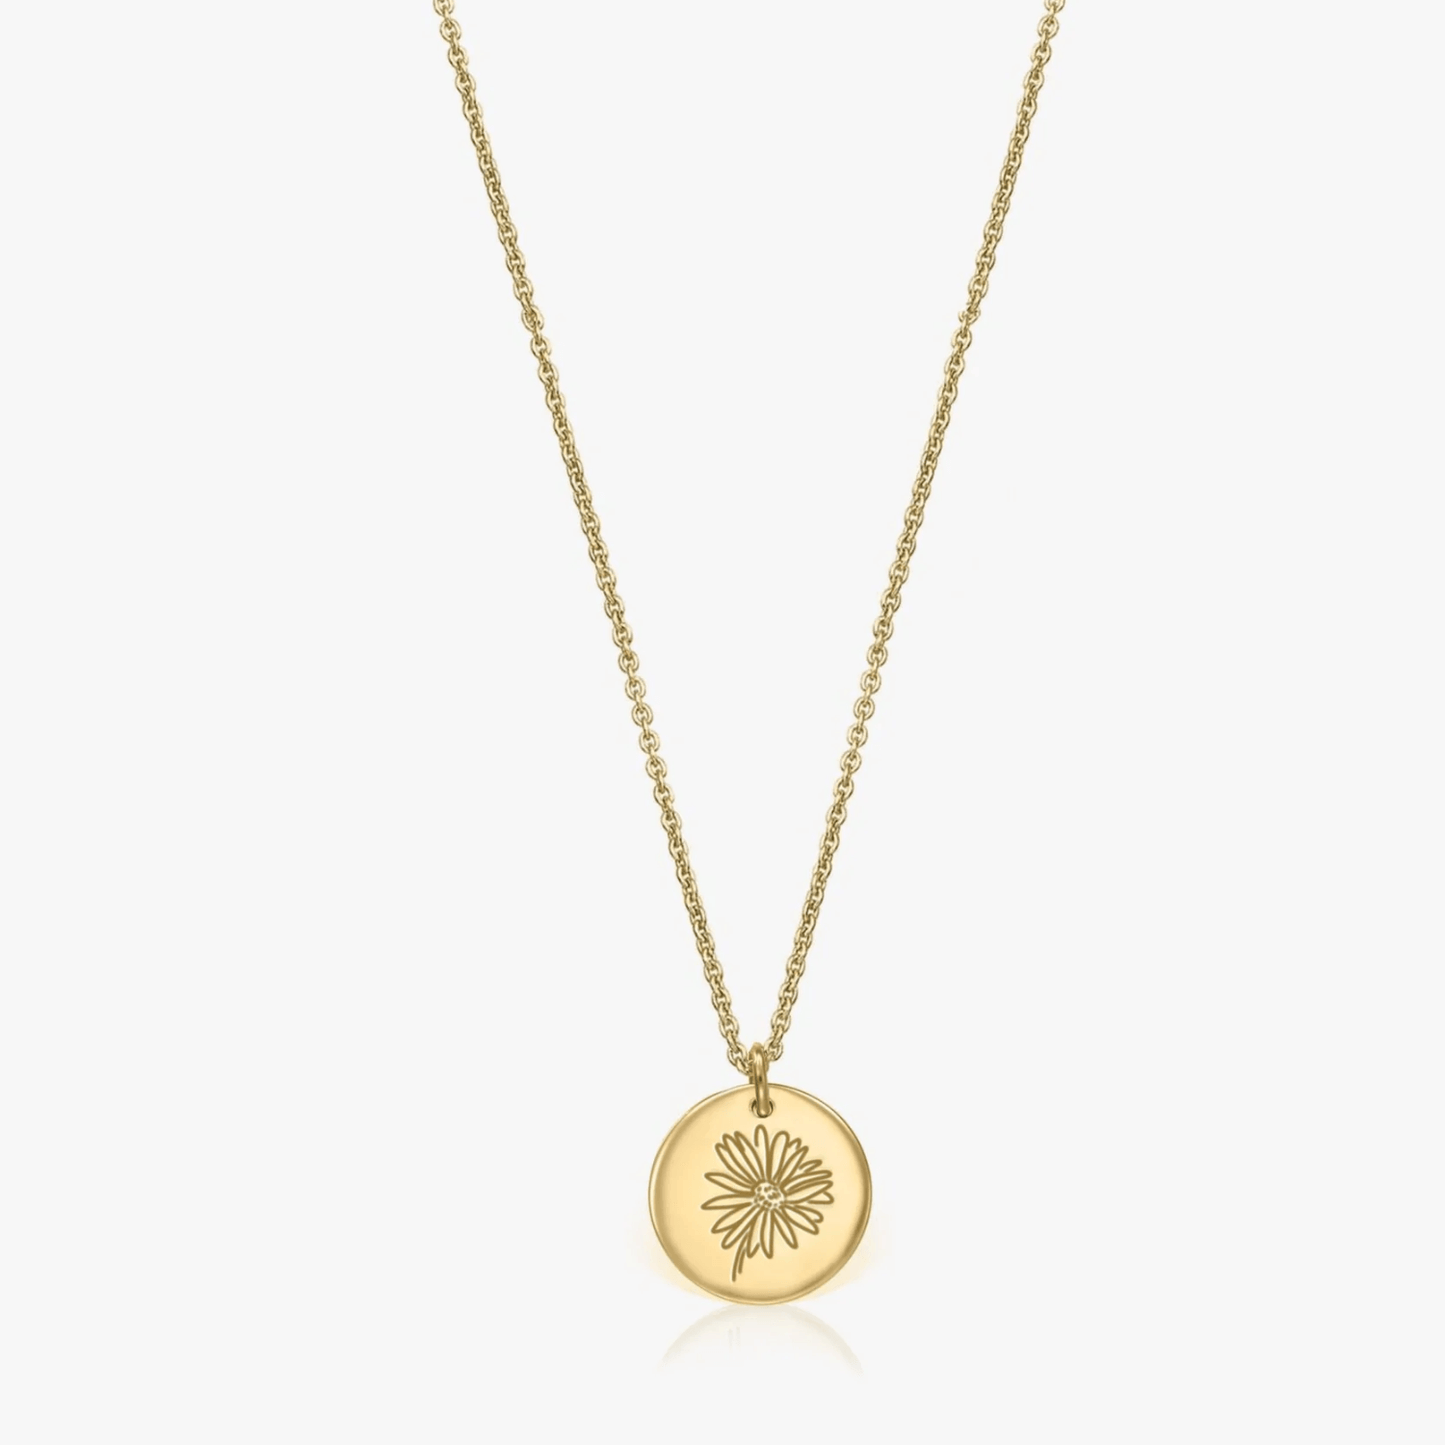 Silver necklace Birth Flower Golden - April Daisy